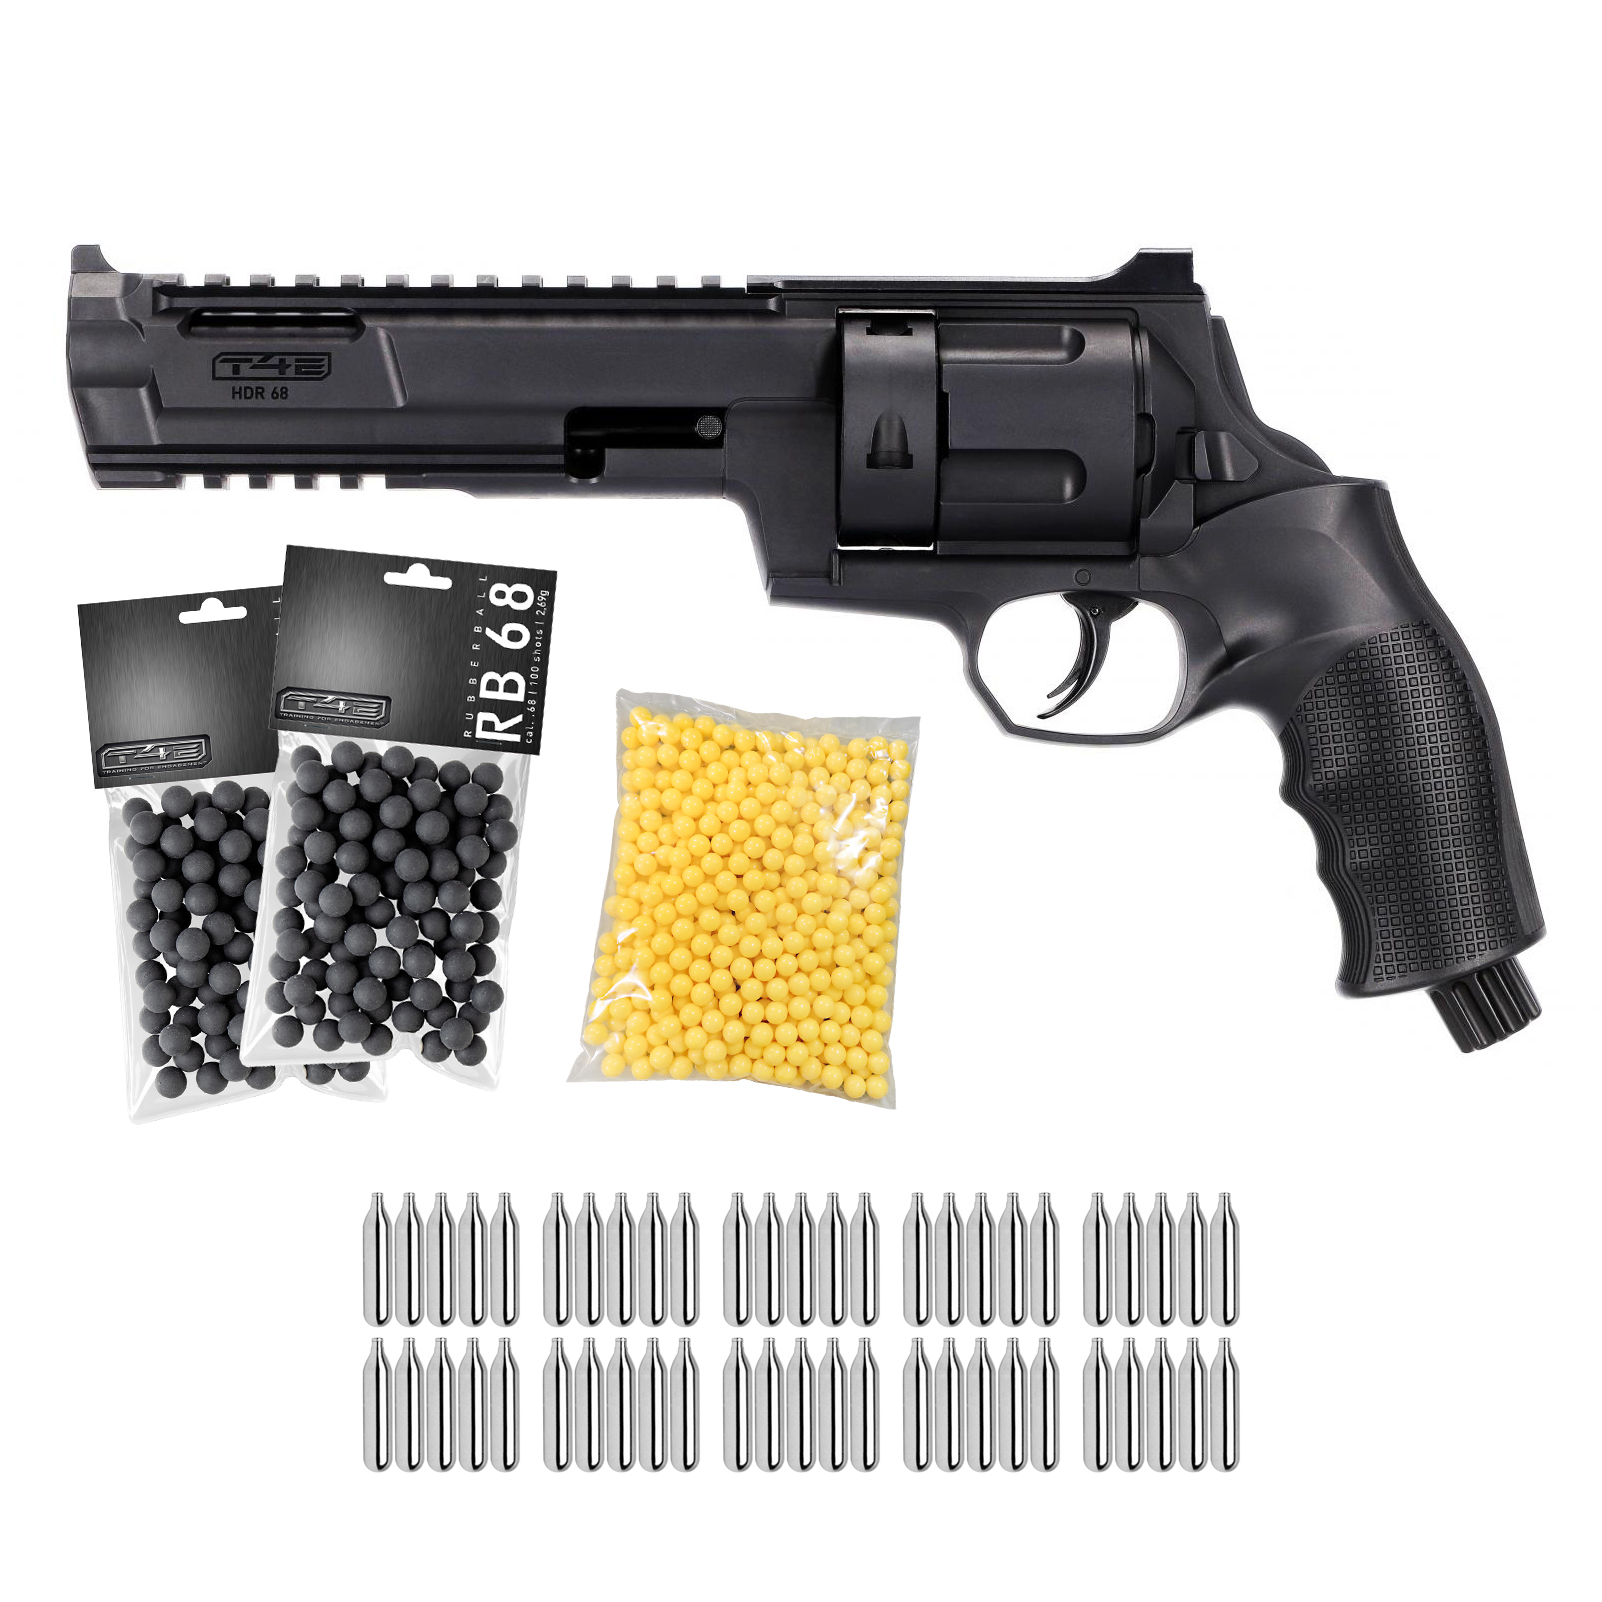 (Paket) Umarex TR 68 / HDR 68, 50x CO2 + Ammo Pack